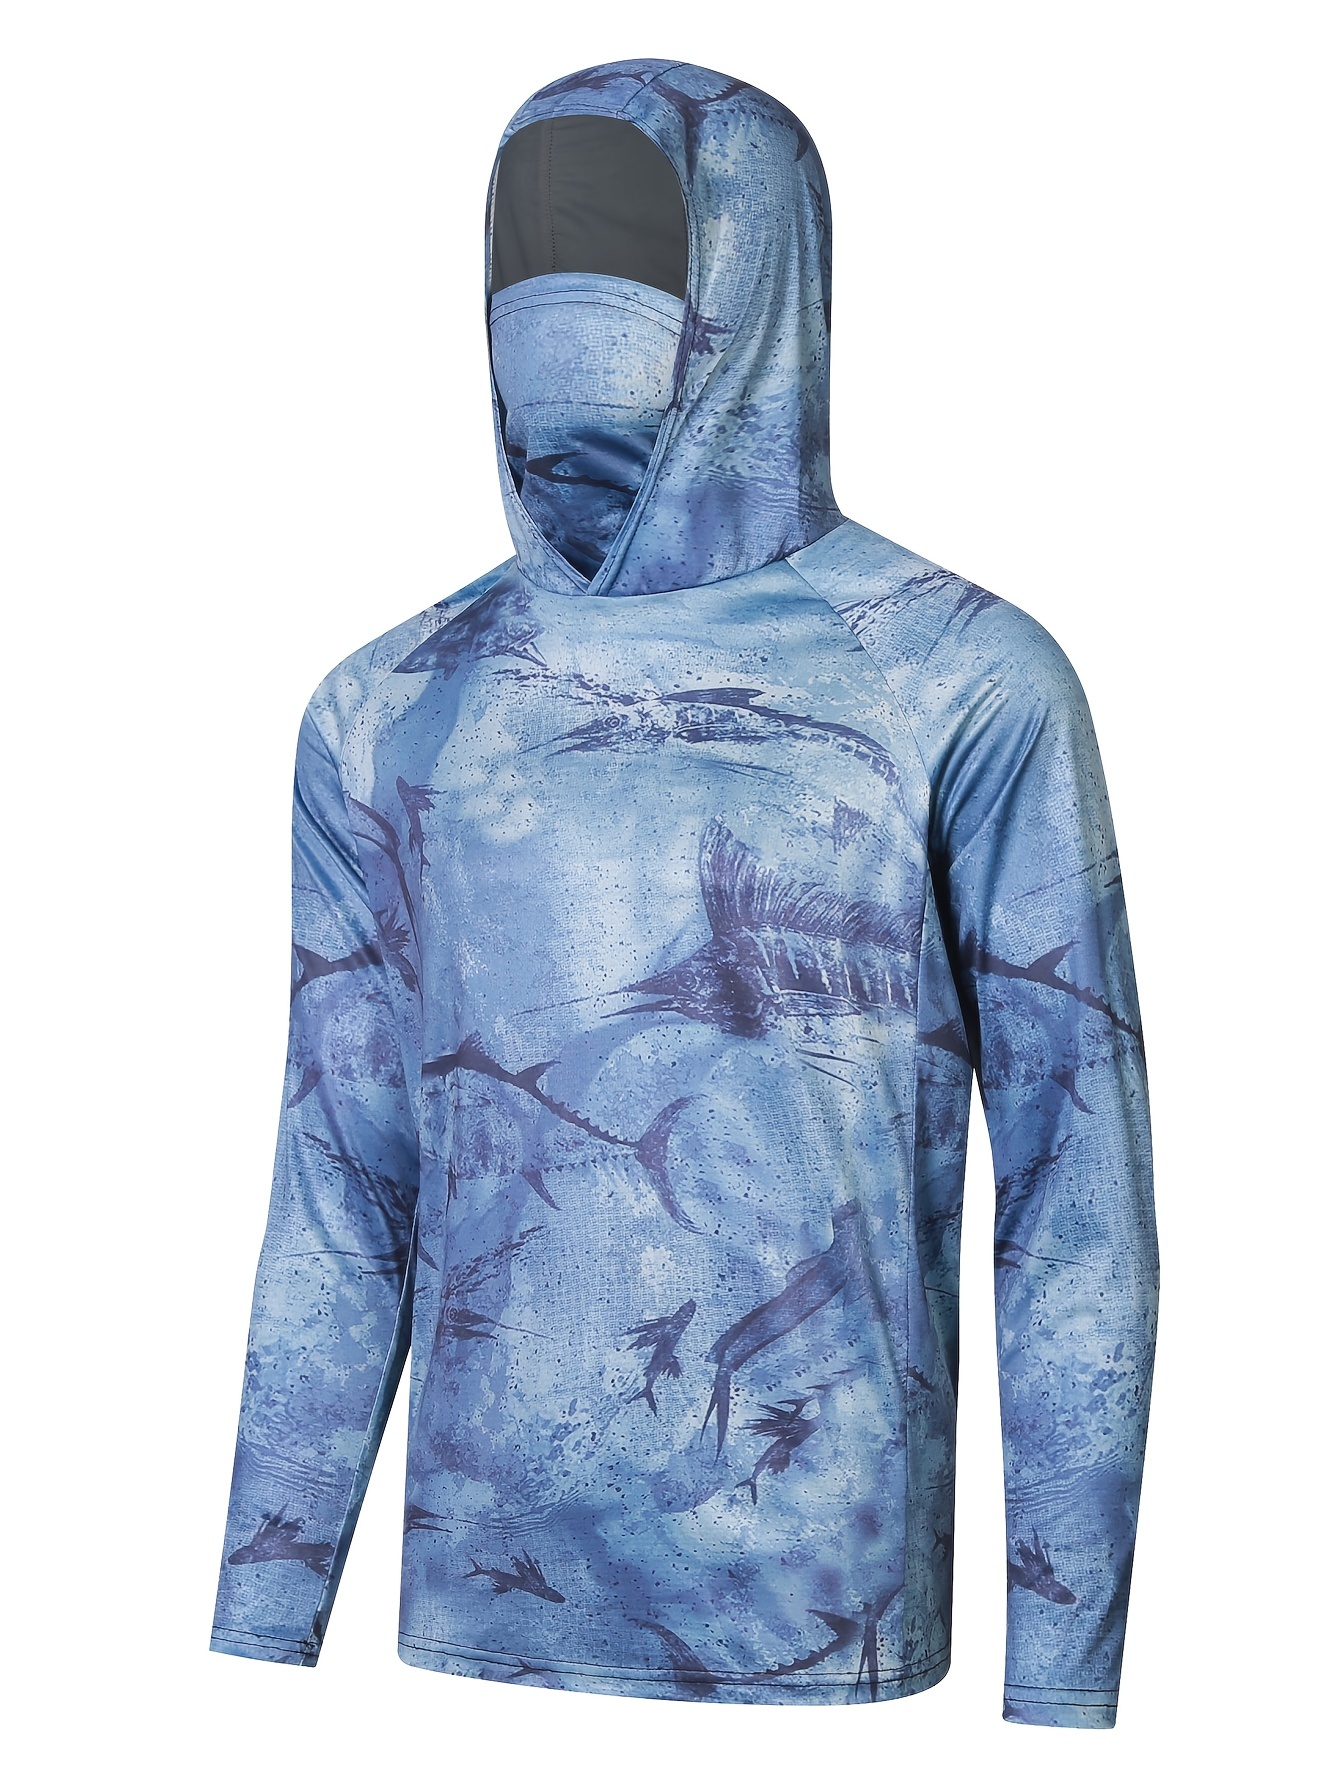 Men's UPF 50+ Sun Protection Hooded Shirt With Mask, Active Swordfish Print Quick Dry Slightly Stretch Long Sleeve Rash Guard For Fishing Hiking